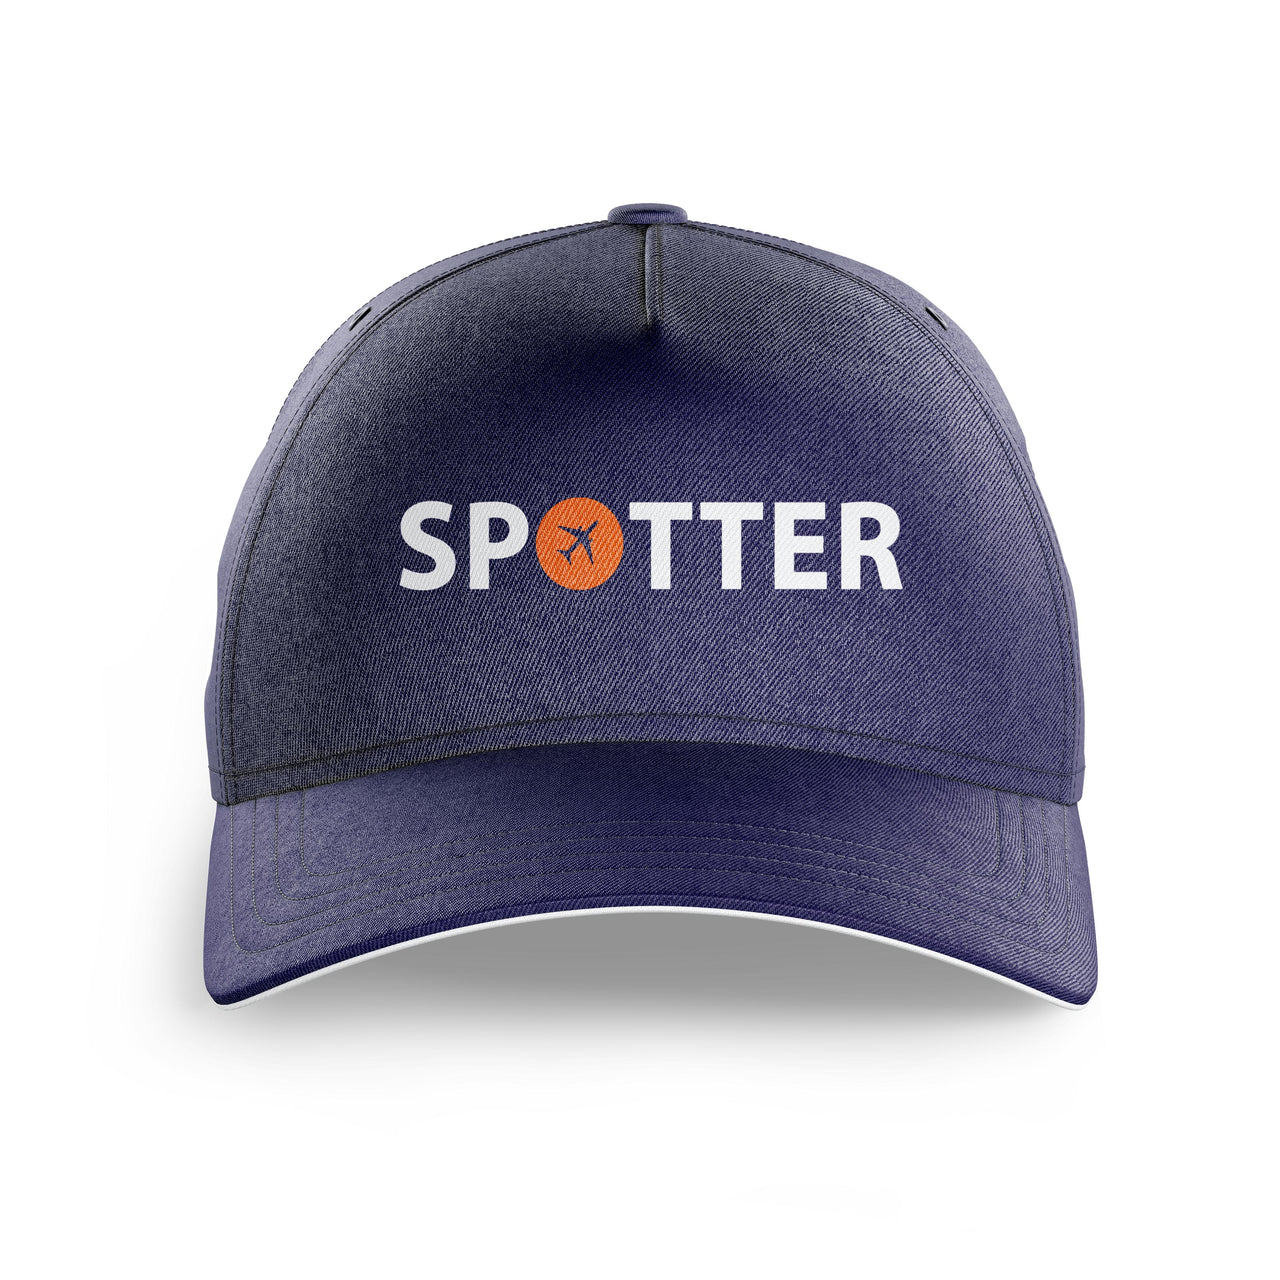 Spotter Printed Hats